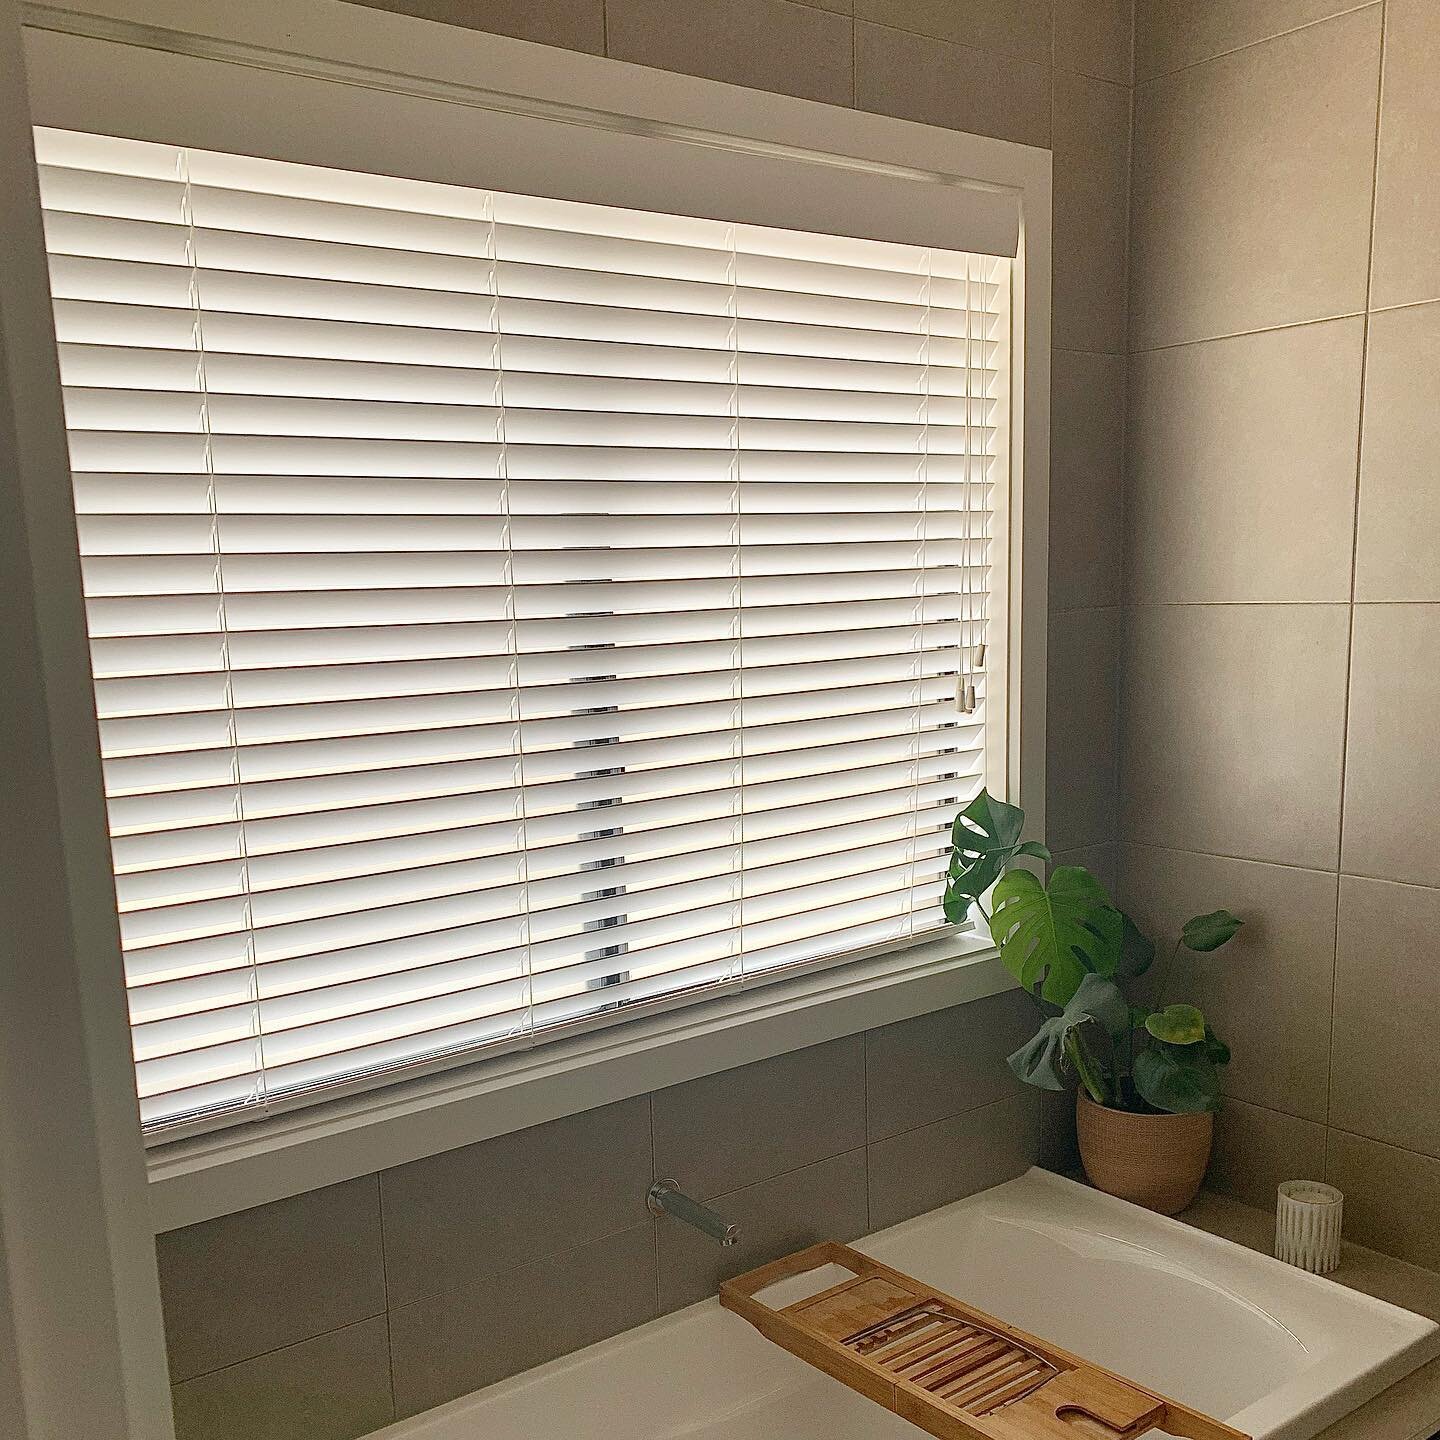 Bathroom furnishings...

Our Wooden white venetian&rsquo;s are always a popular choice for bathrooms, they are so versatile and will work in just about any room. 

They offer privacy while still allowing the light to flow in.

Contact us for your fre